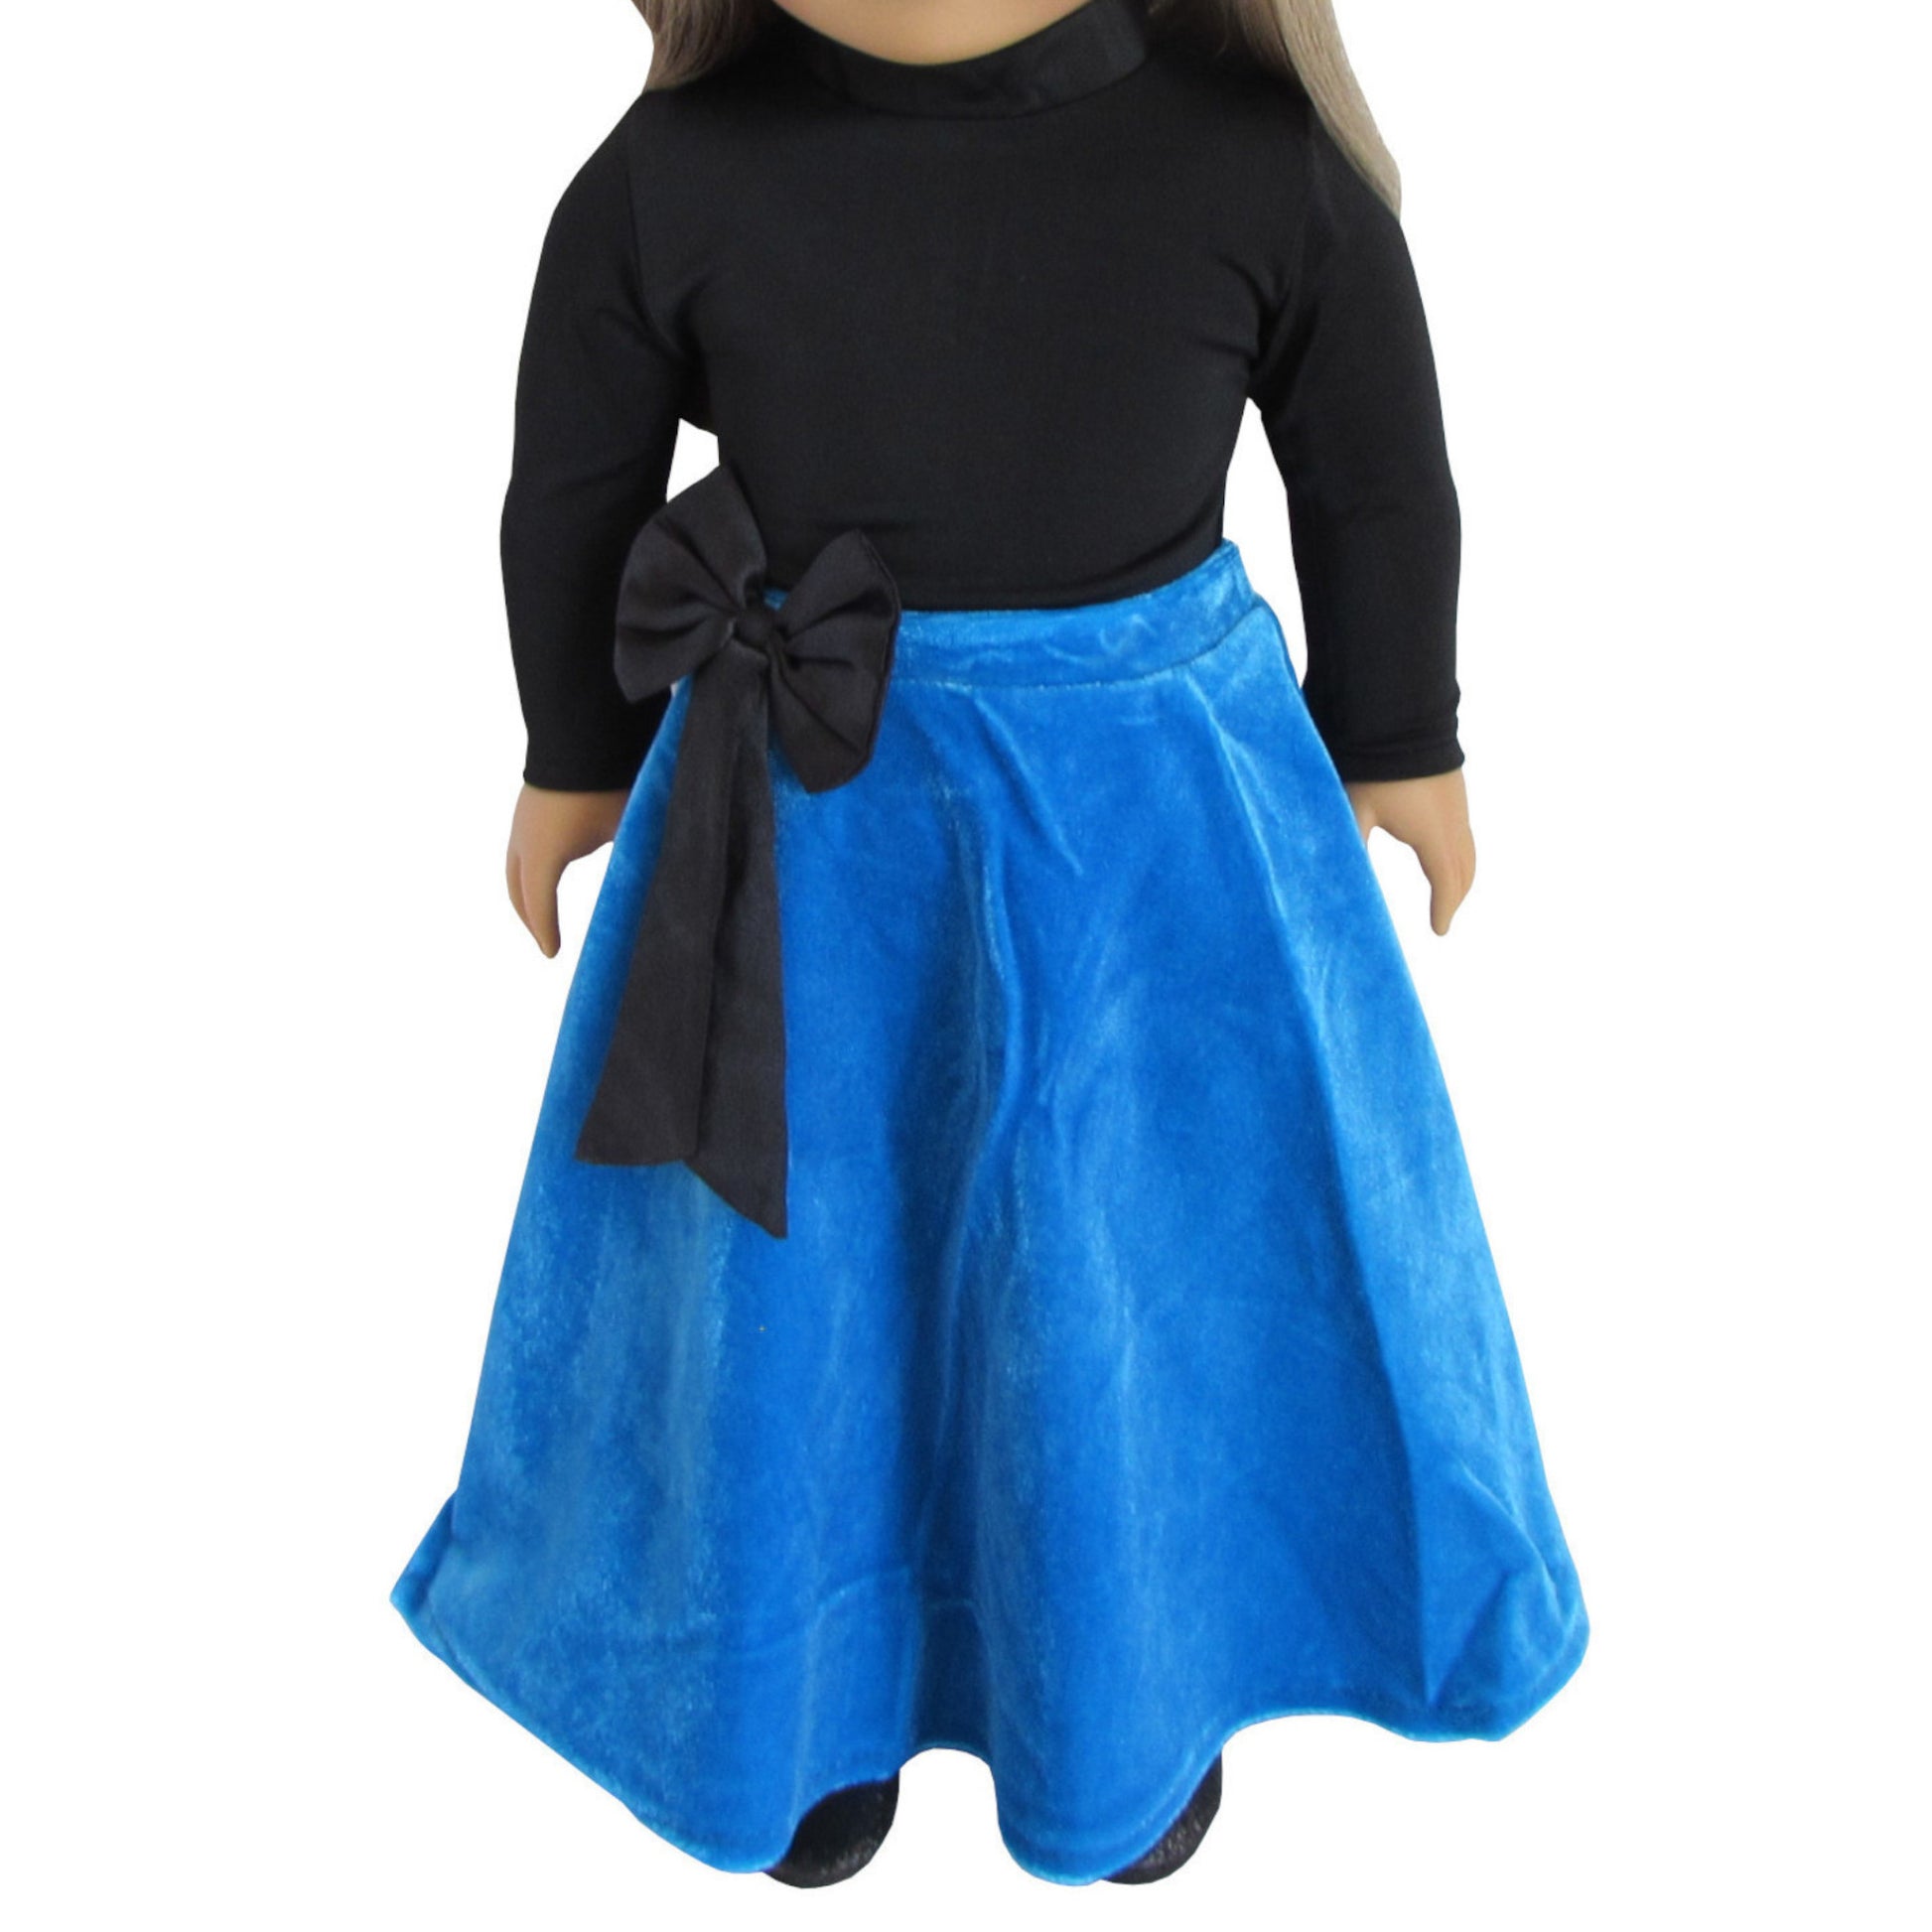 Black and Blue Velvet Skirt and Top for 18-inch dolls with doll